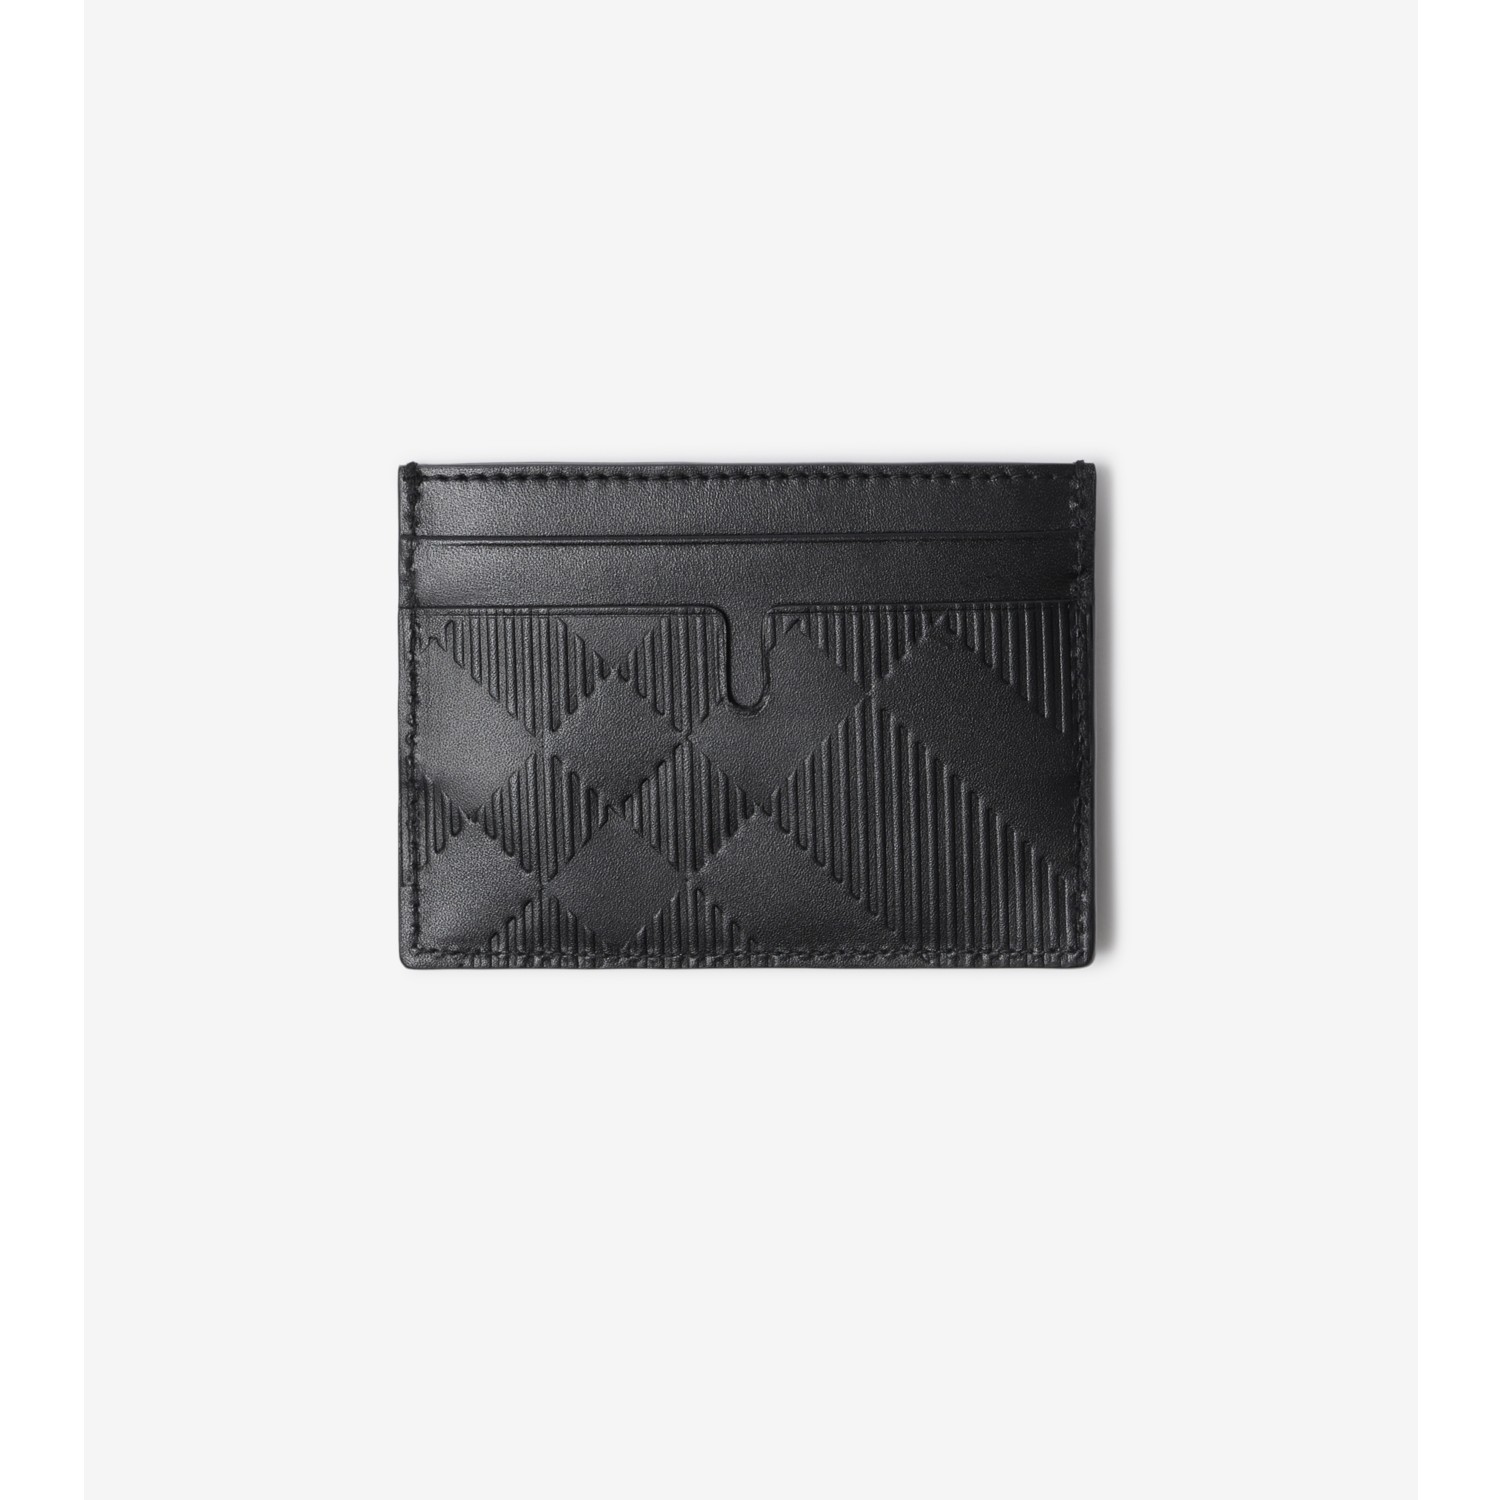 Burberry Check Card Holder in Black - Burberry